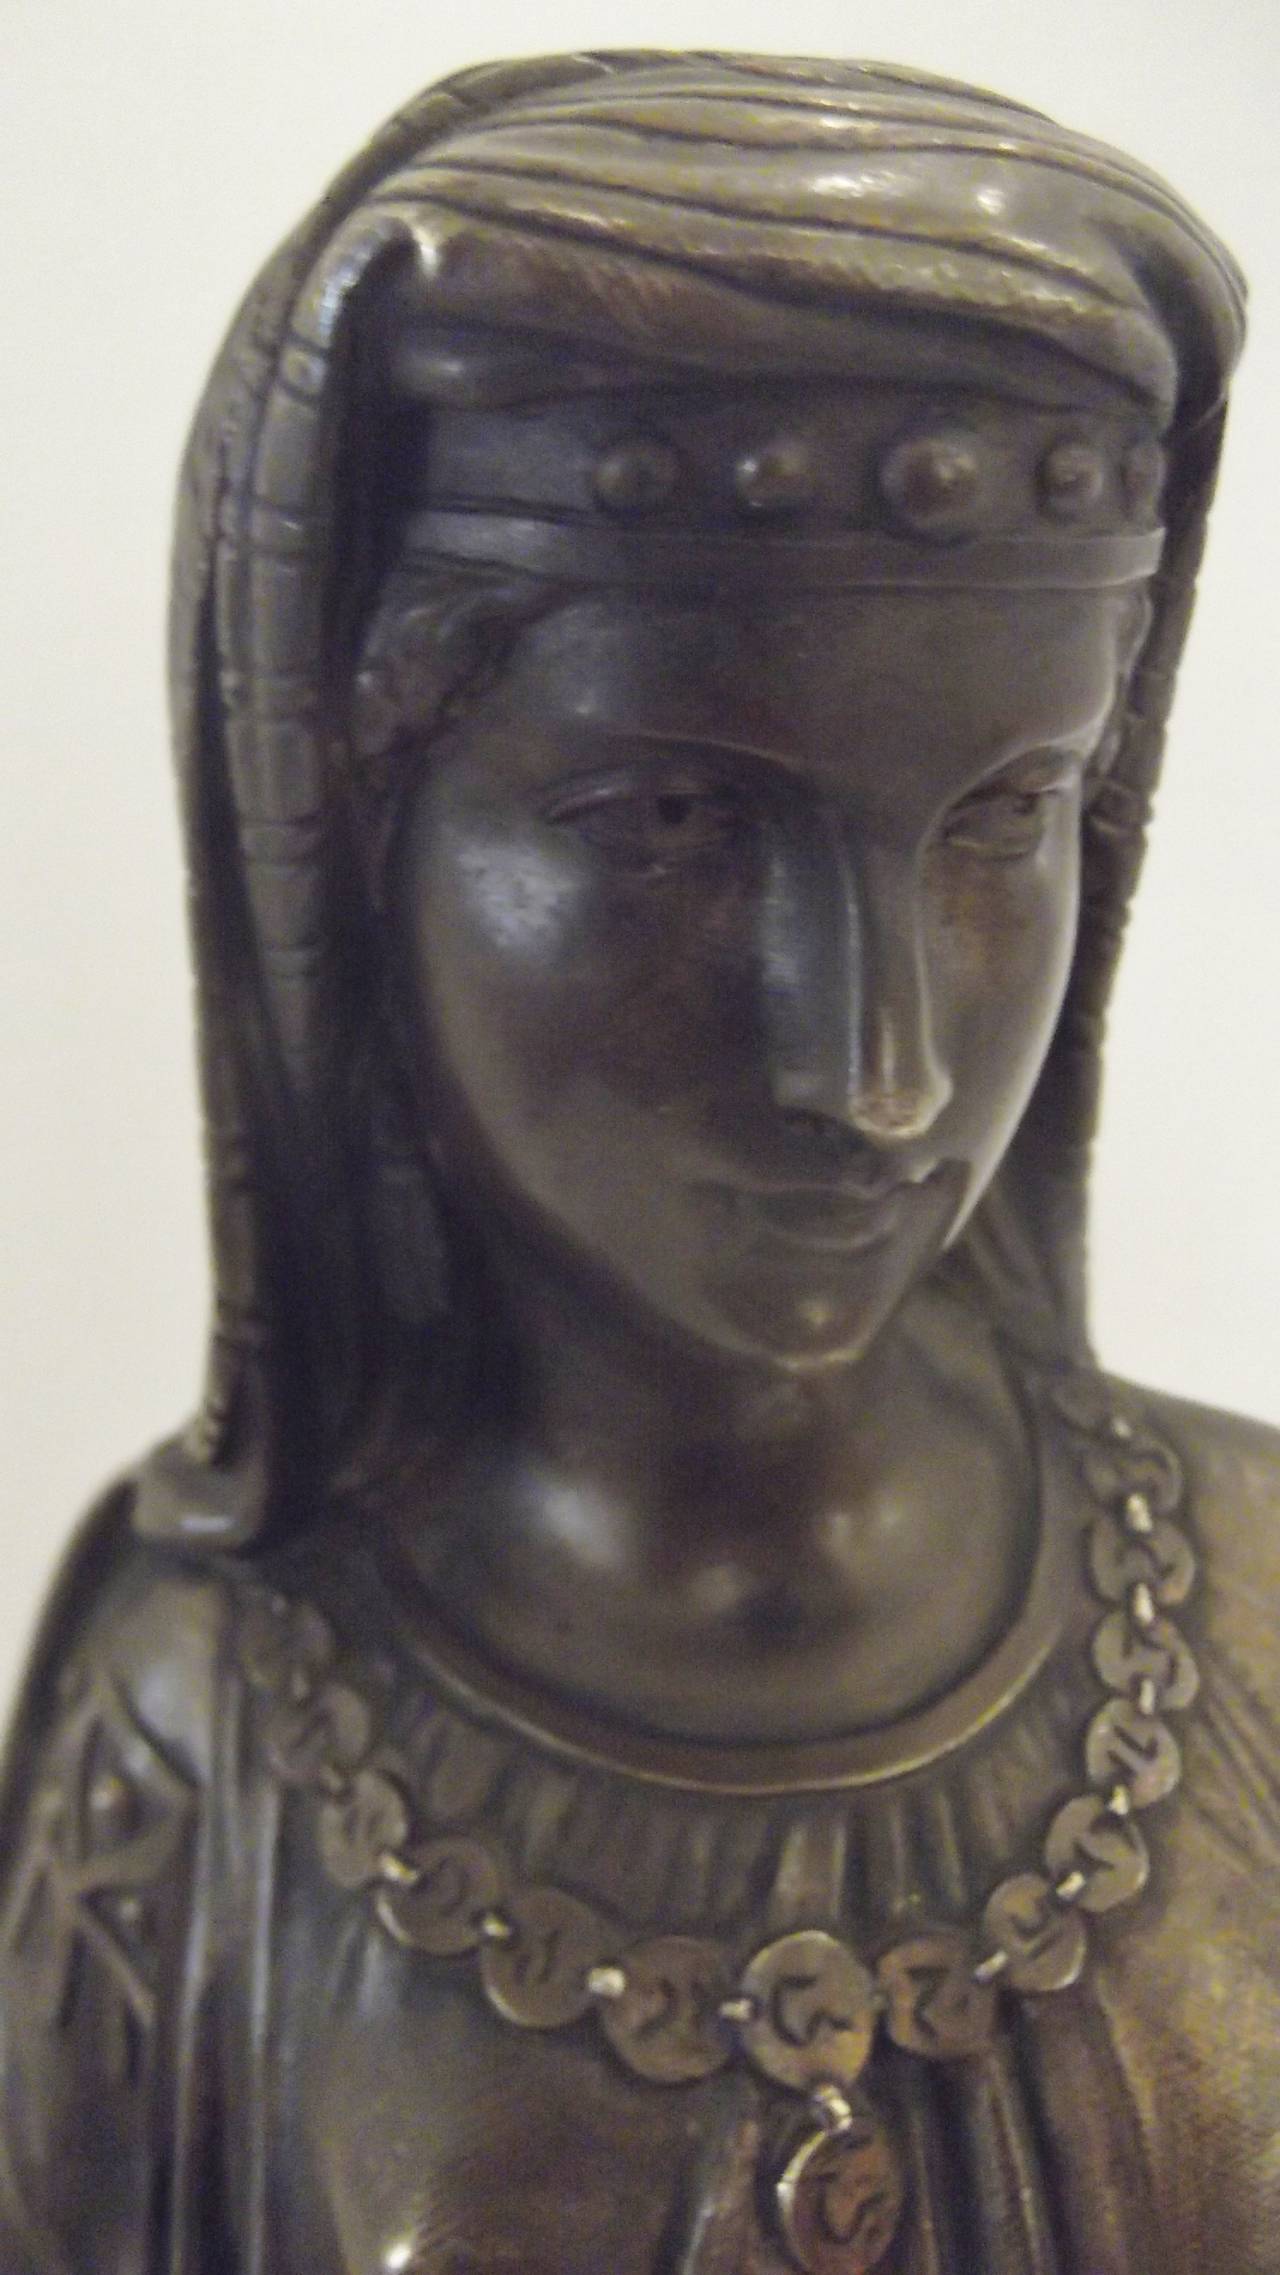 A BRONZE FIGURE OF JUDITH WITH THE HEAD OF HOLOFERNES, Beautifully cast and artist signed L. Pilet 1836-1916

Léon Pilet was a French visual artist who was born in 1836. Numerous works by the artist have been sold at auction, including 'The Water